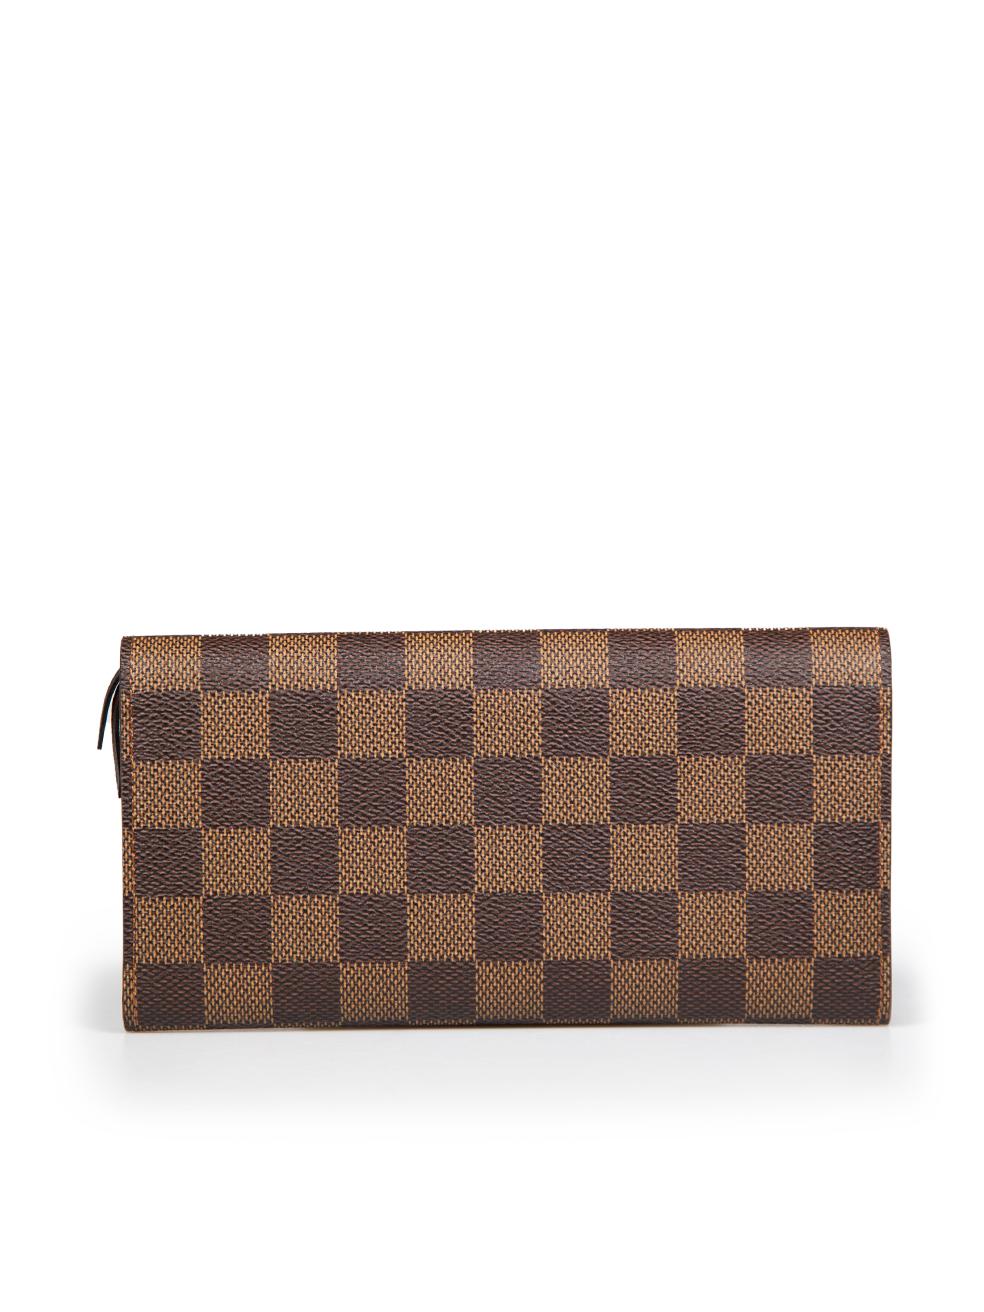 Louis Vuitton Brown Damier Ebene Emilie Wallet In Excellent Condition For Sale In London, GB